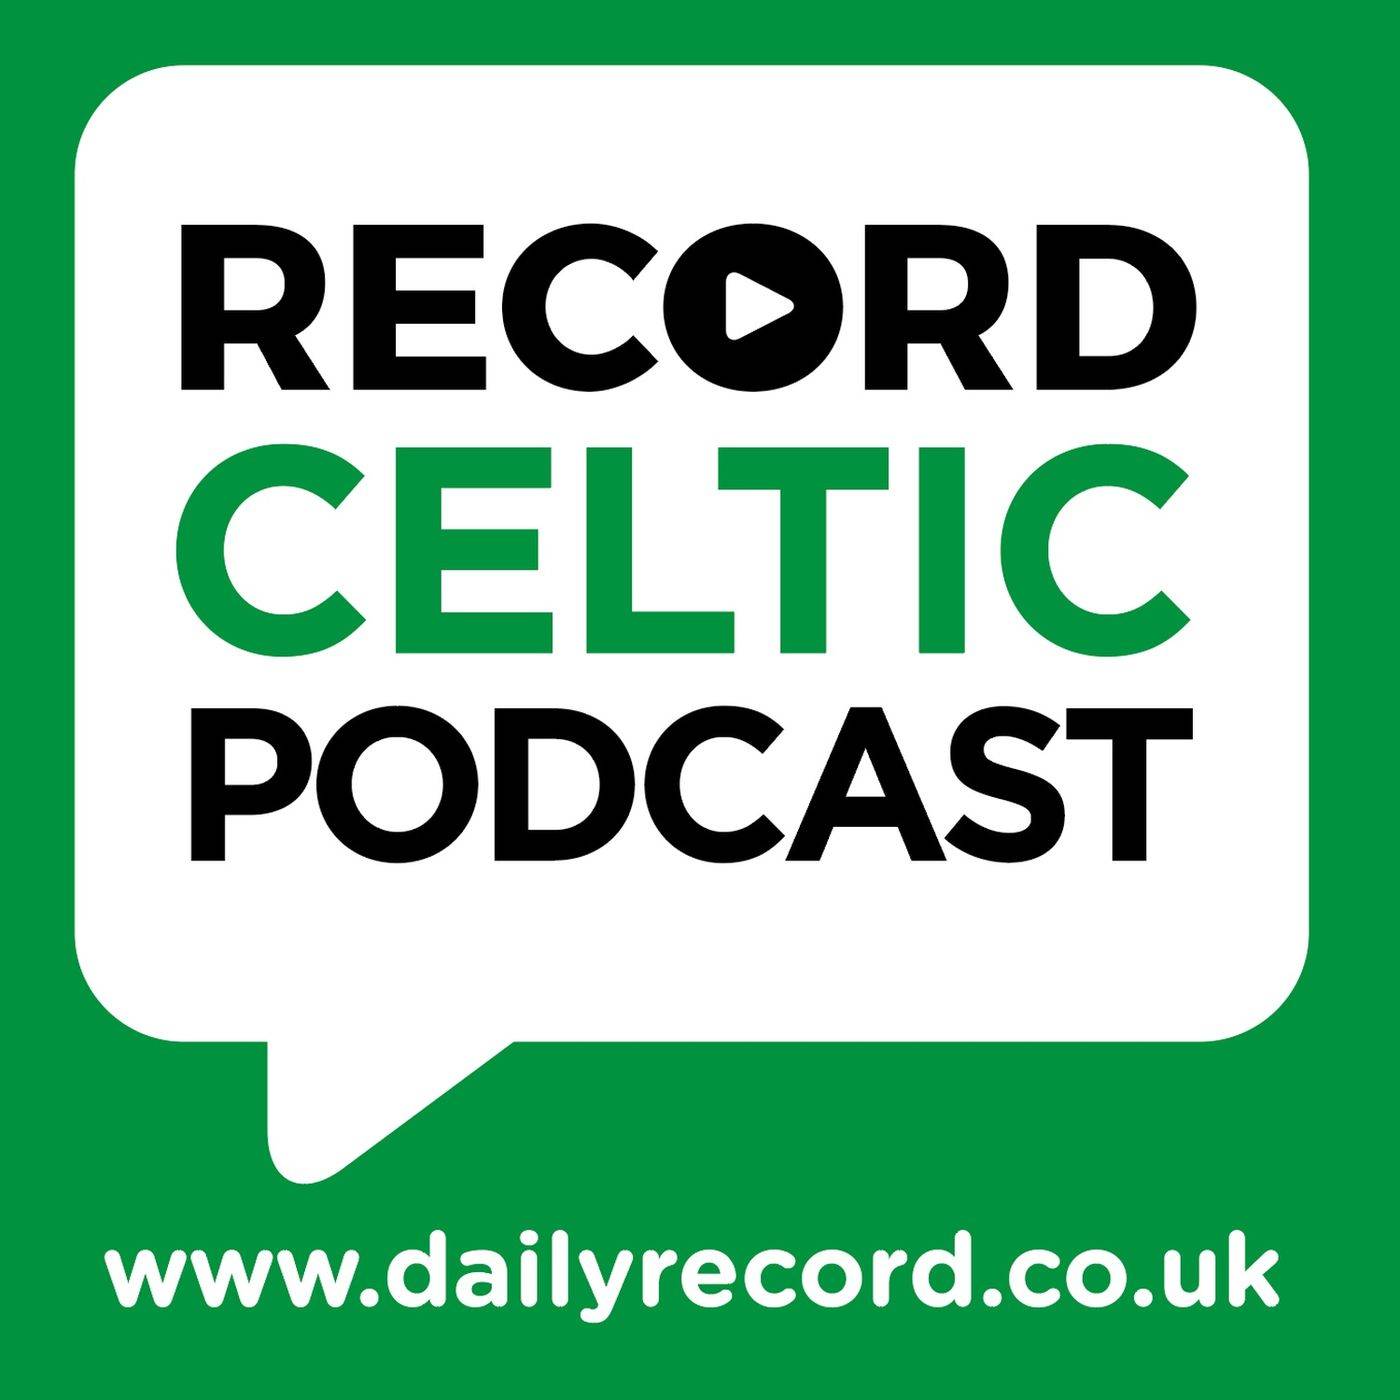 Atletico display was some of the best Celtic football in years | Brendan Rodgers finally looks at home again | The board needs to provide funds for Kyogo alternative